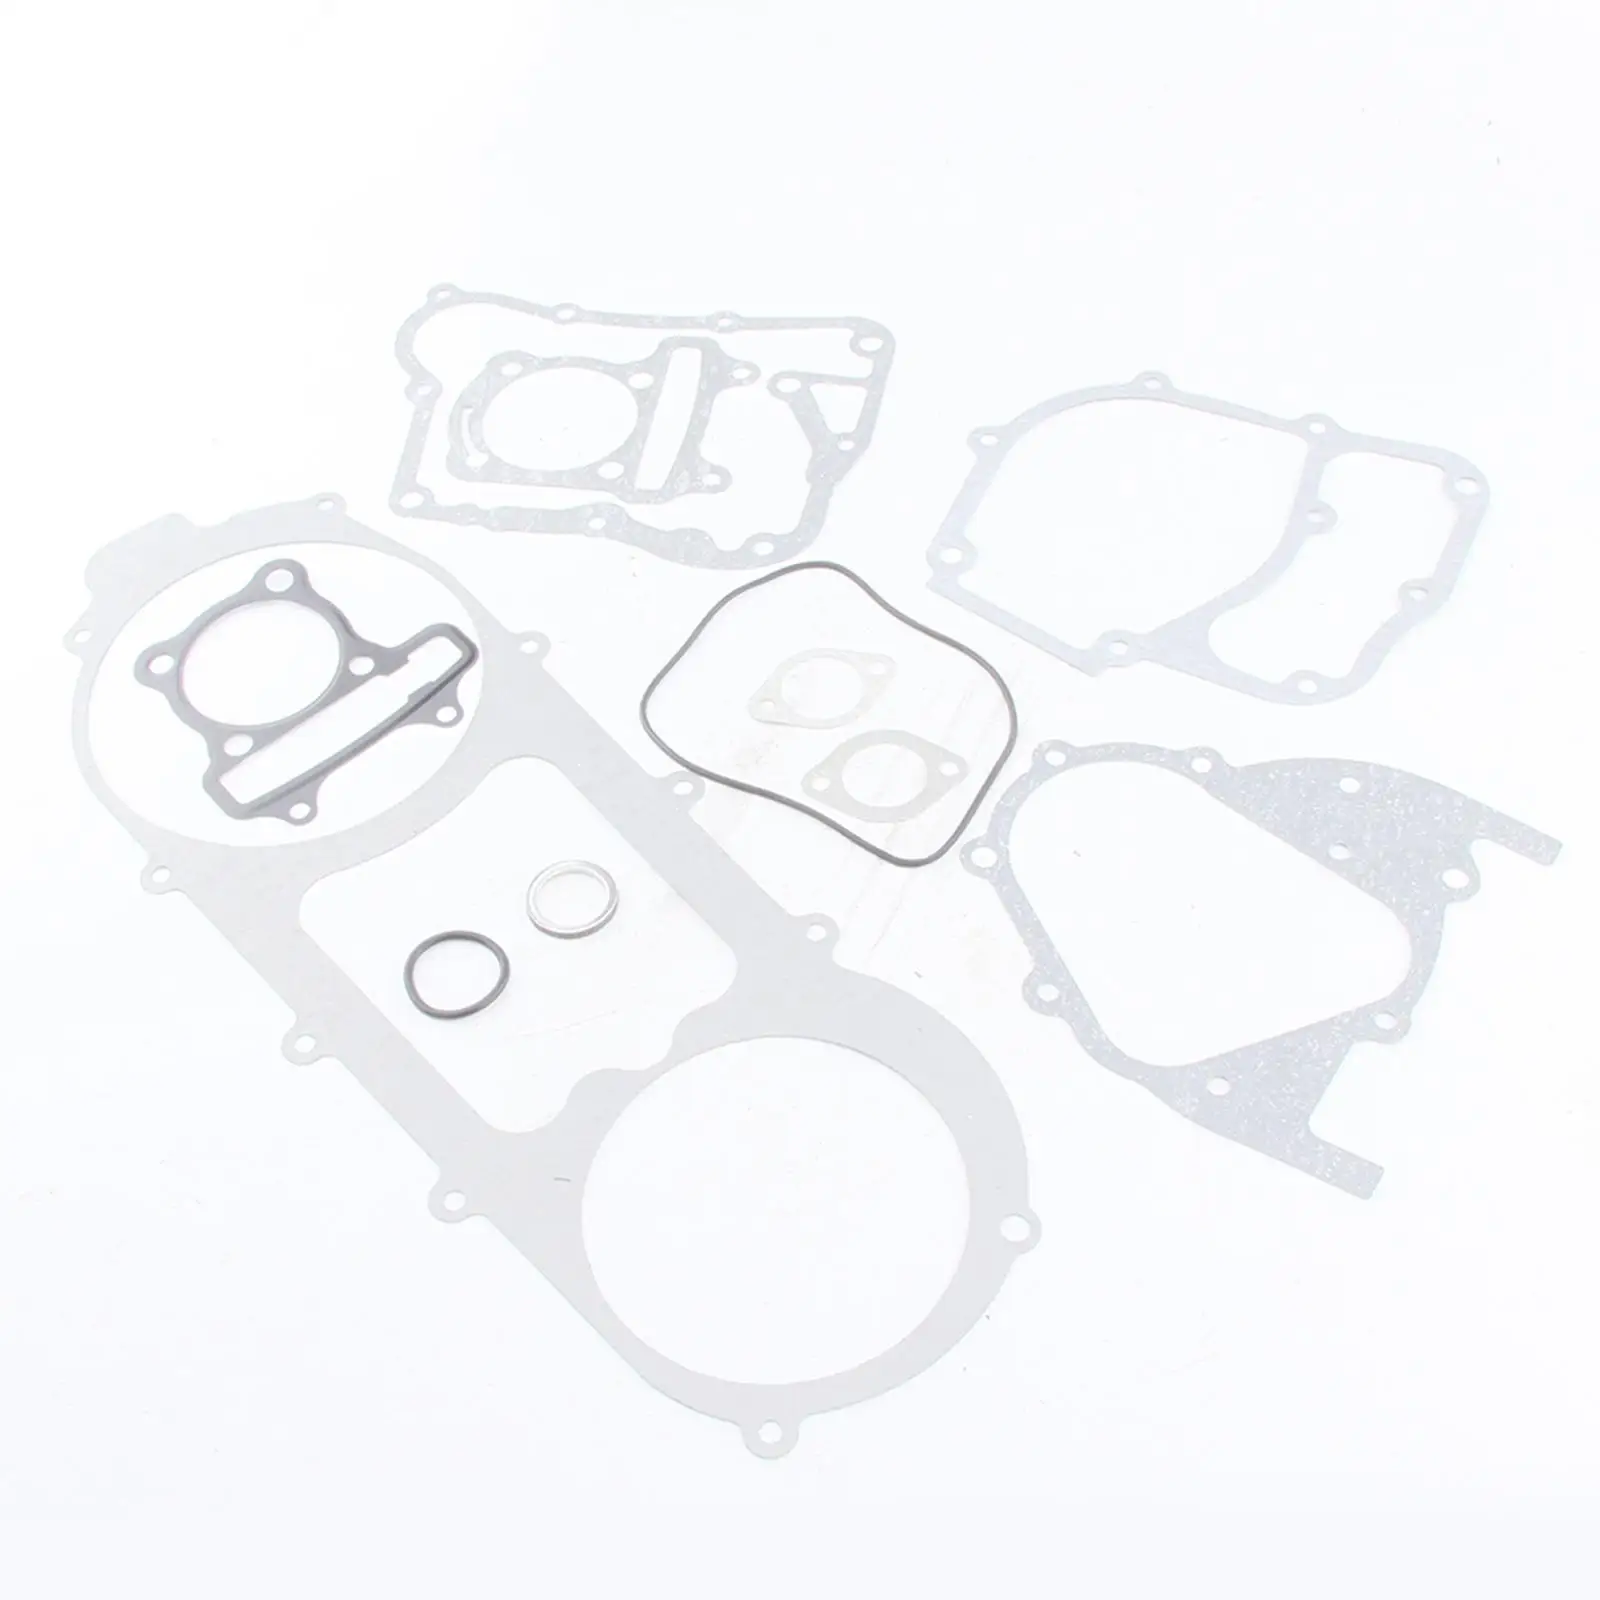  Long  Head Gasket Set Kit for GY6 150cc Moped Scooters  Go Karts QuadEasy to install.